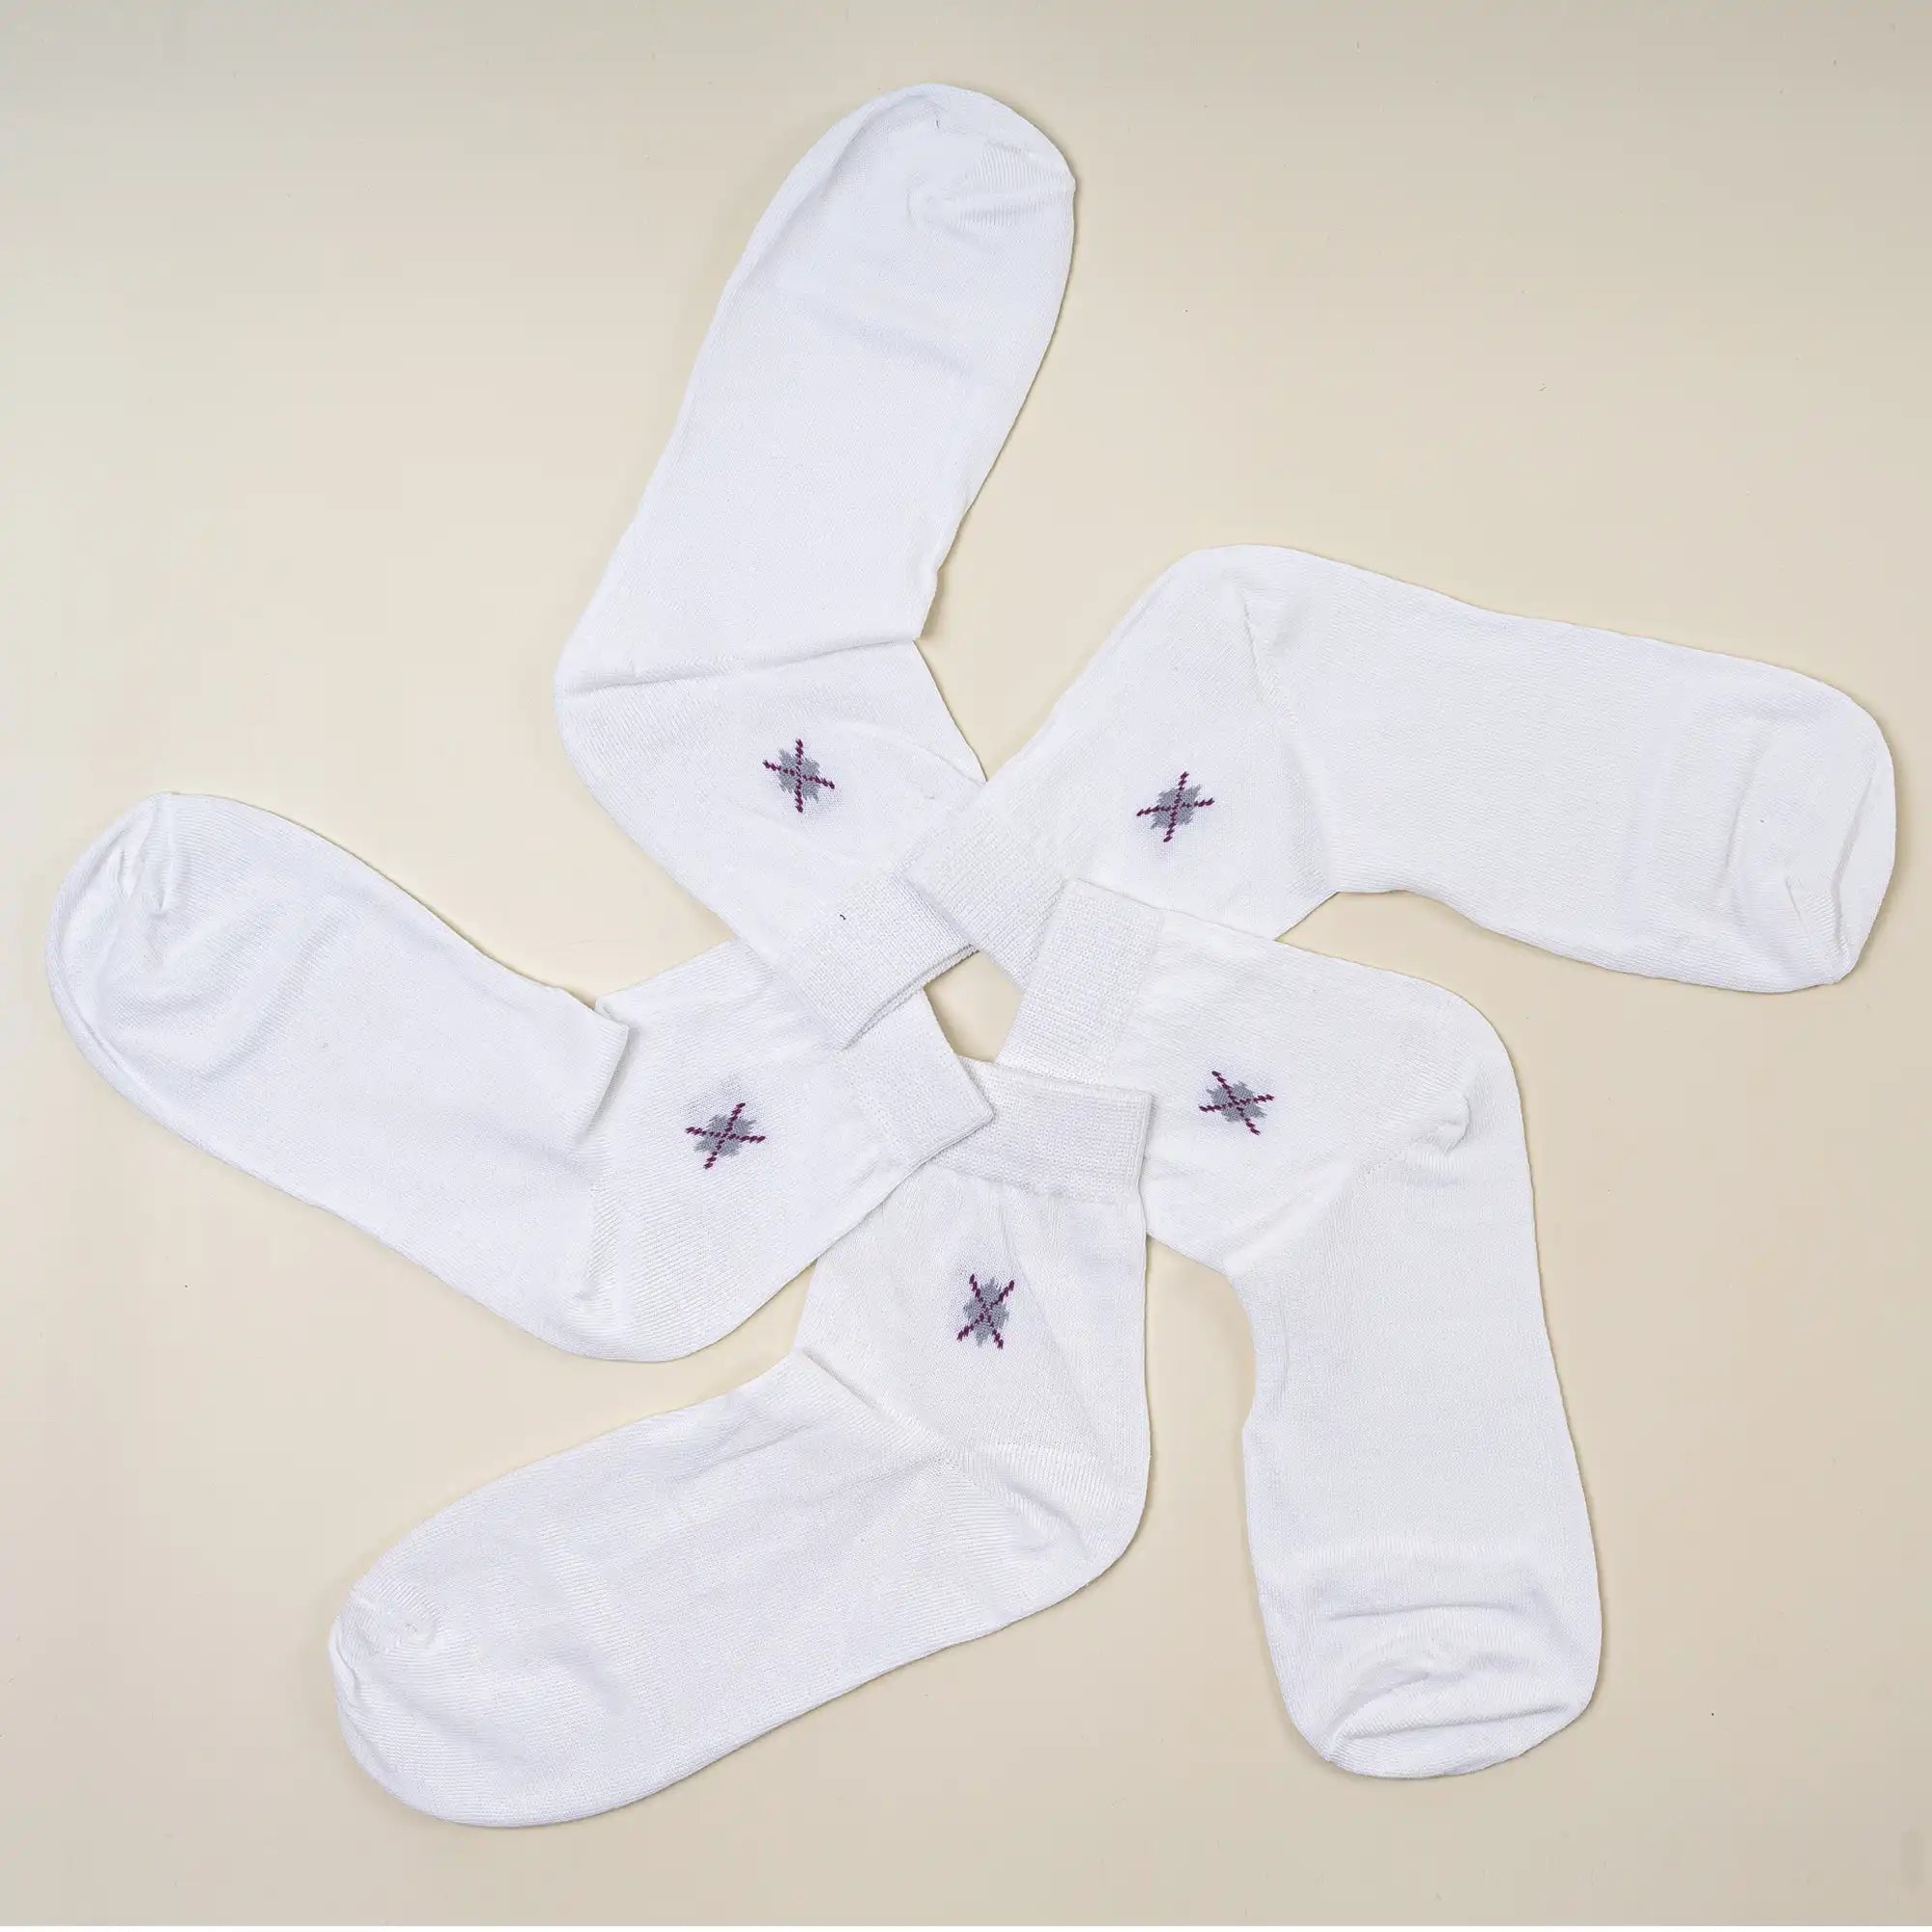 Young Wings Men's White Colour Cotton Fabric Solid Ankle Length Socks - Pack of 5, Style no. 2200-M1